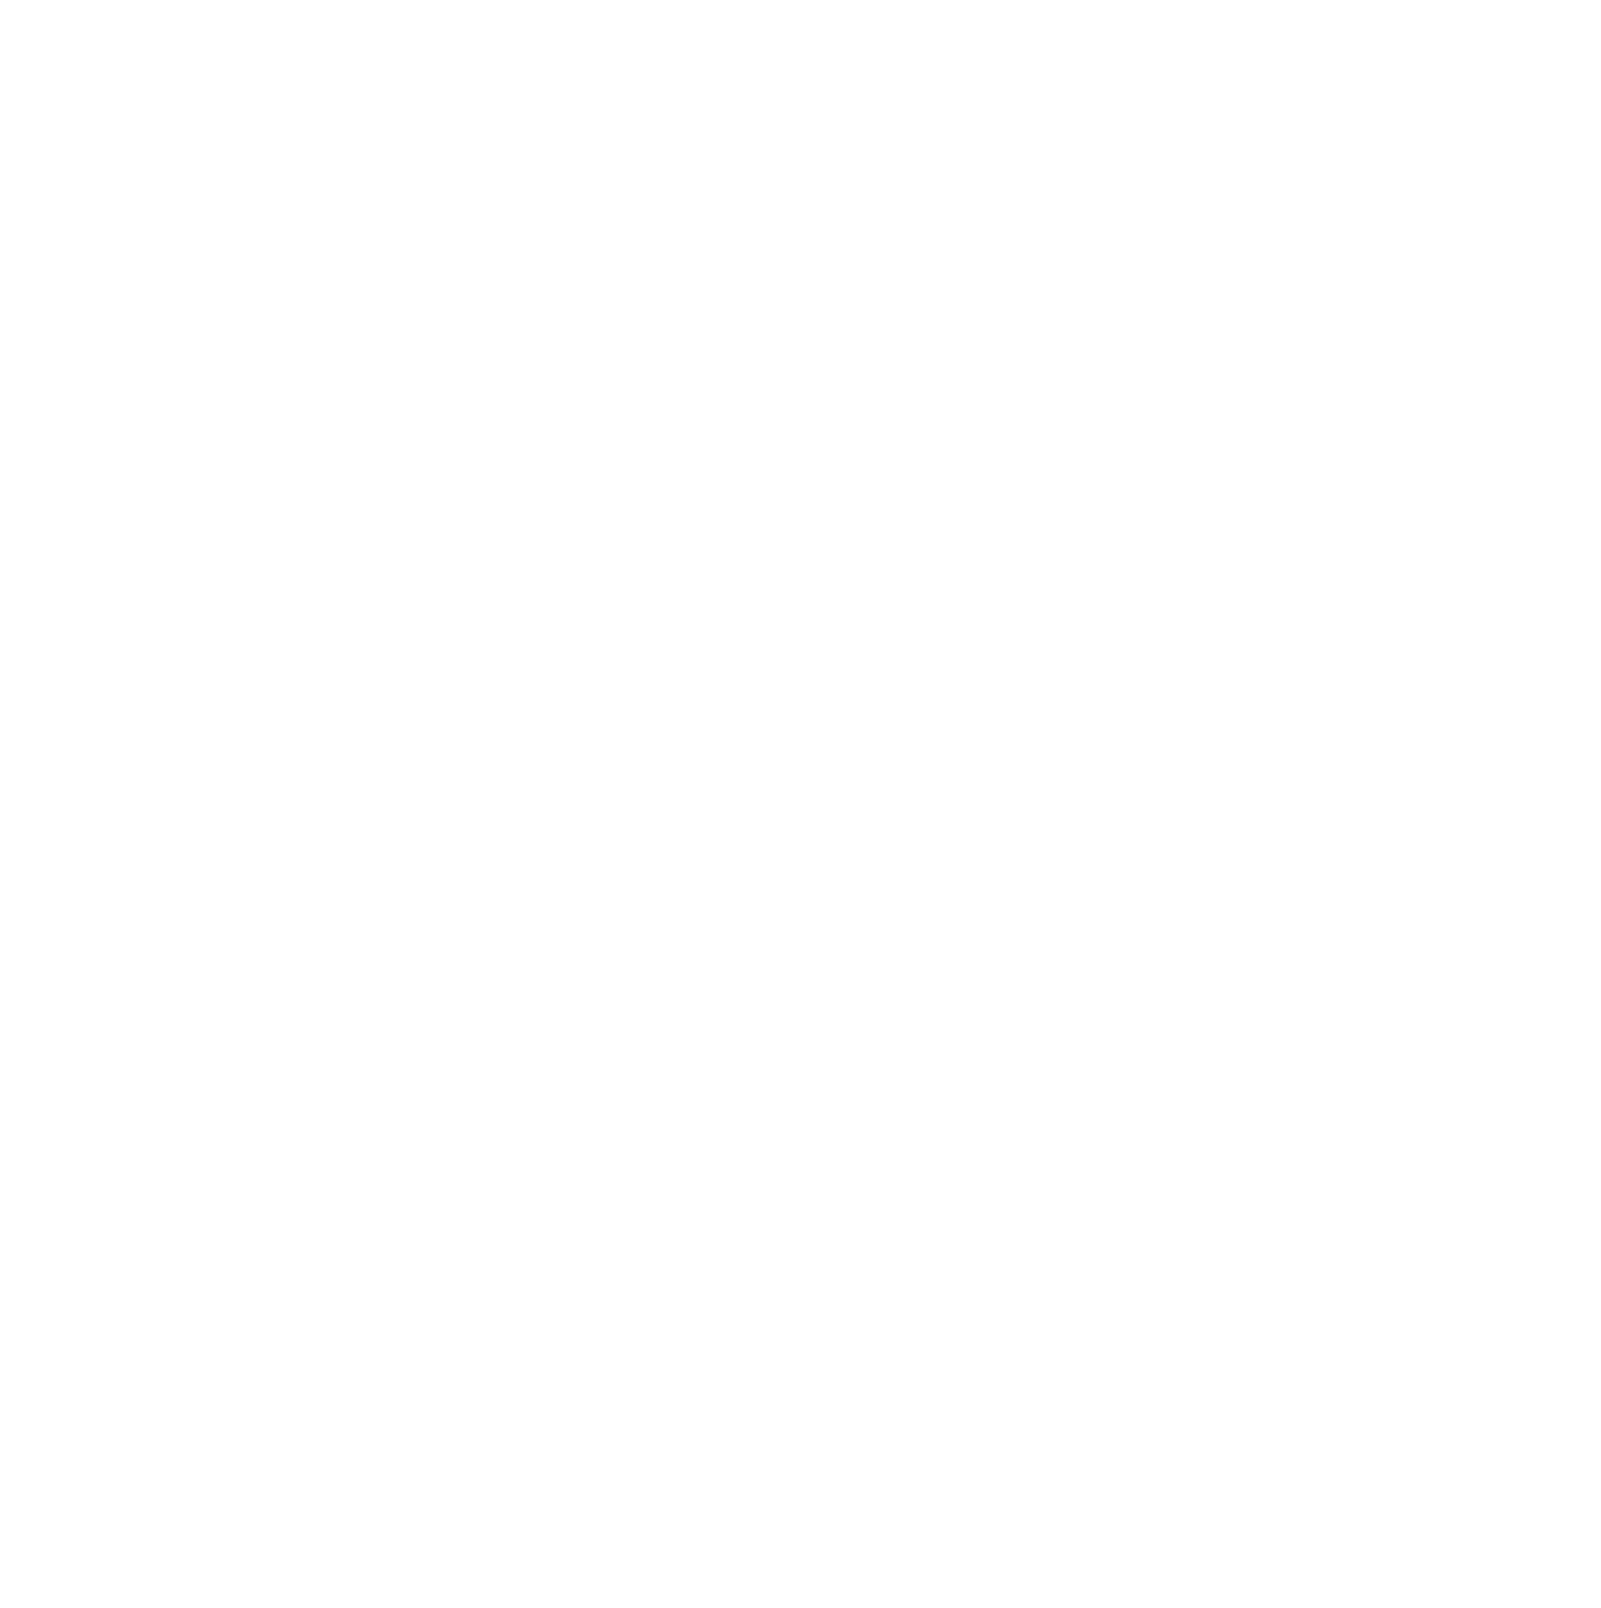 Ranch Water